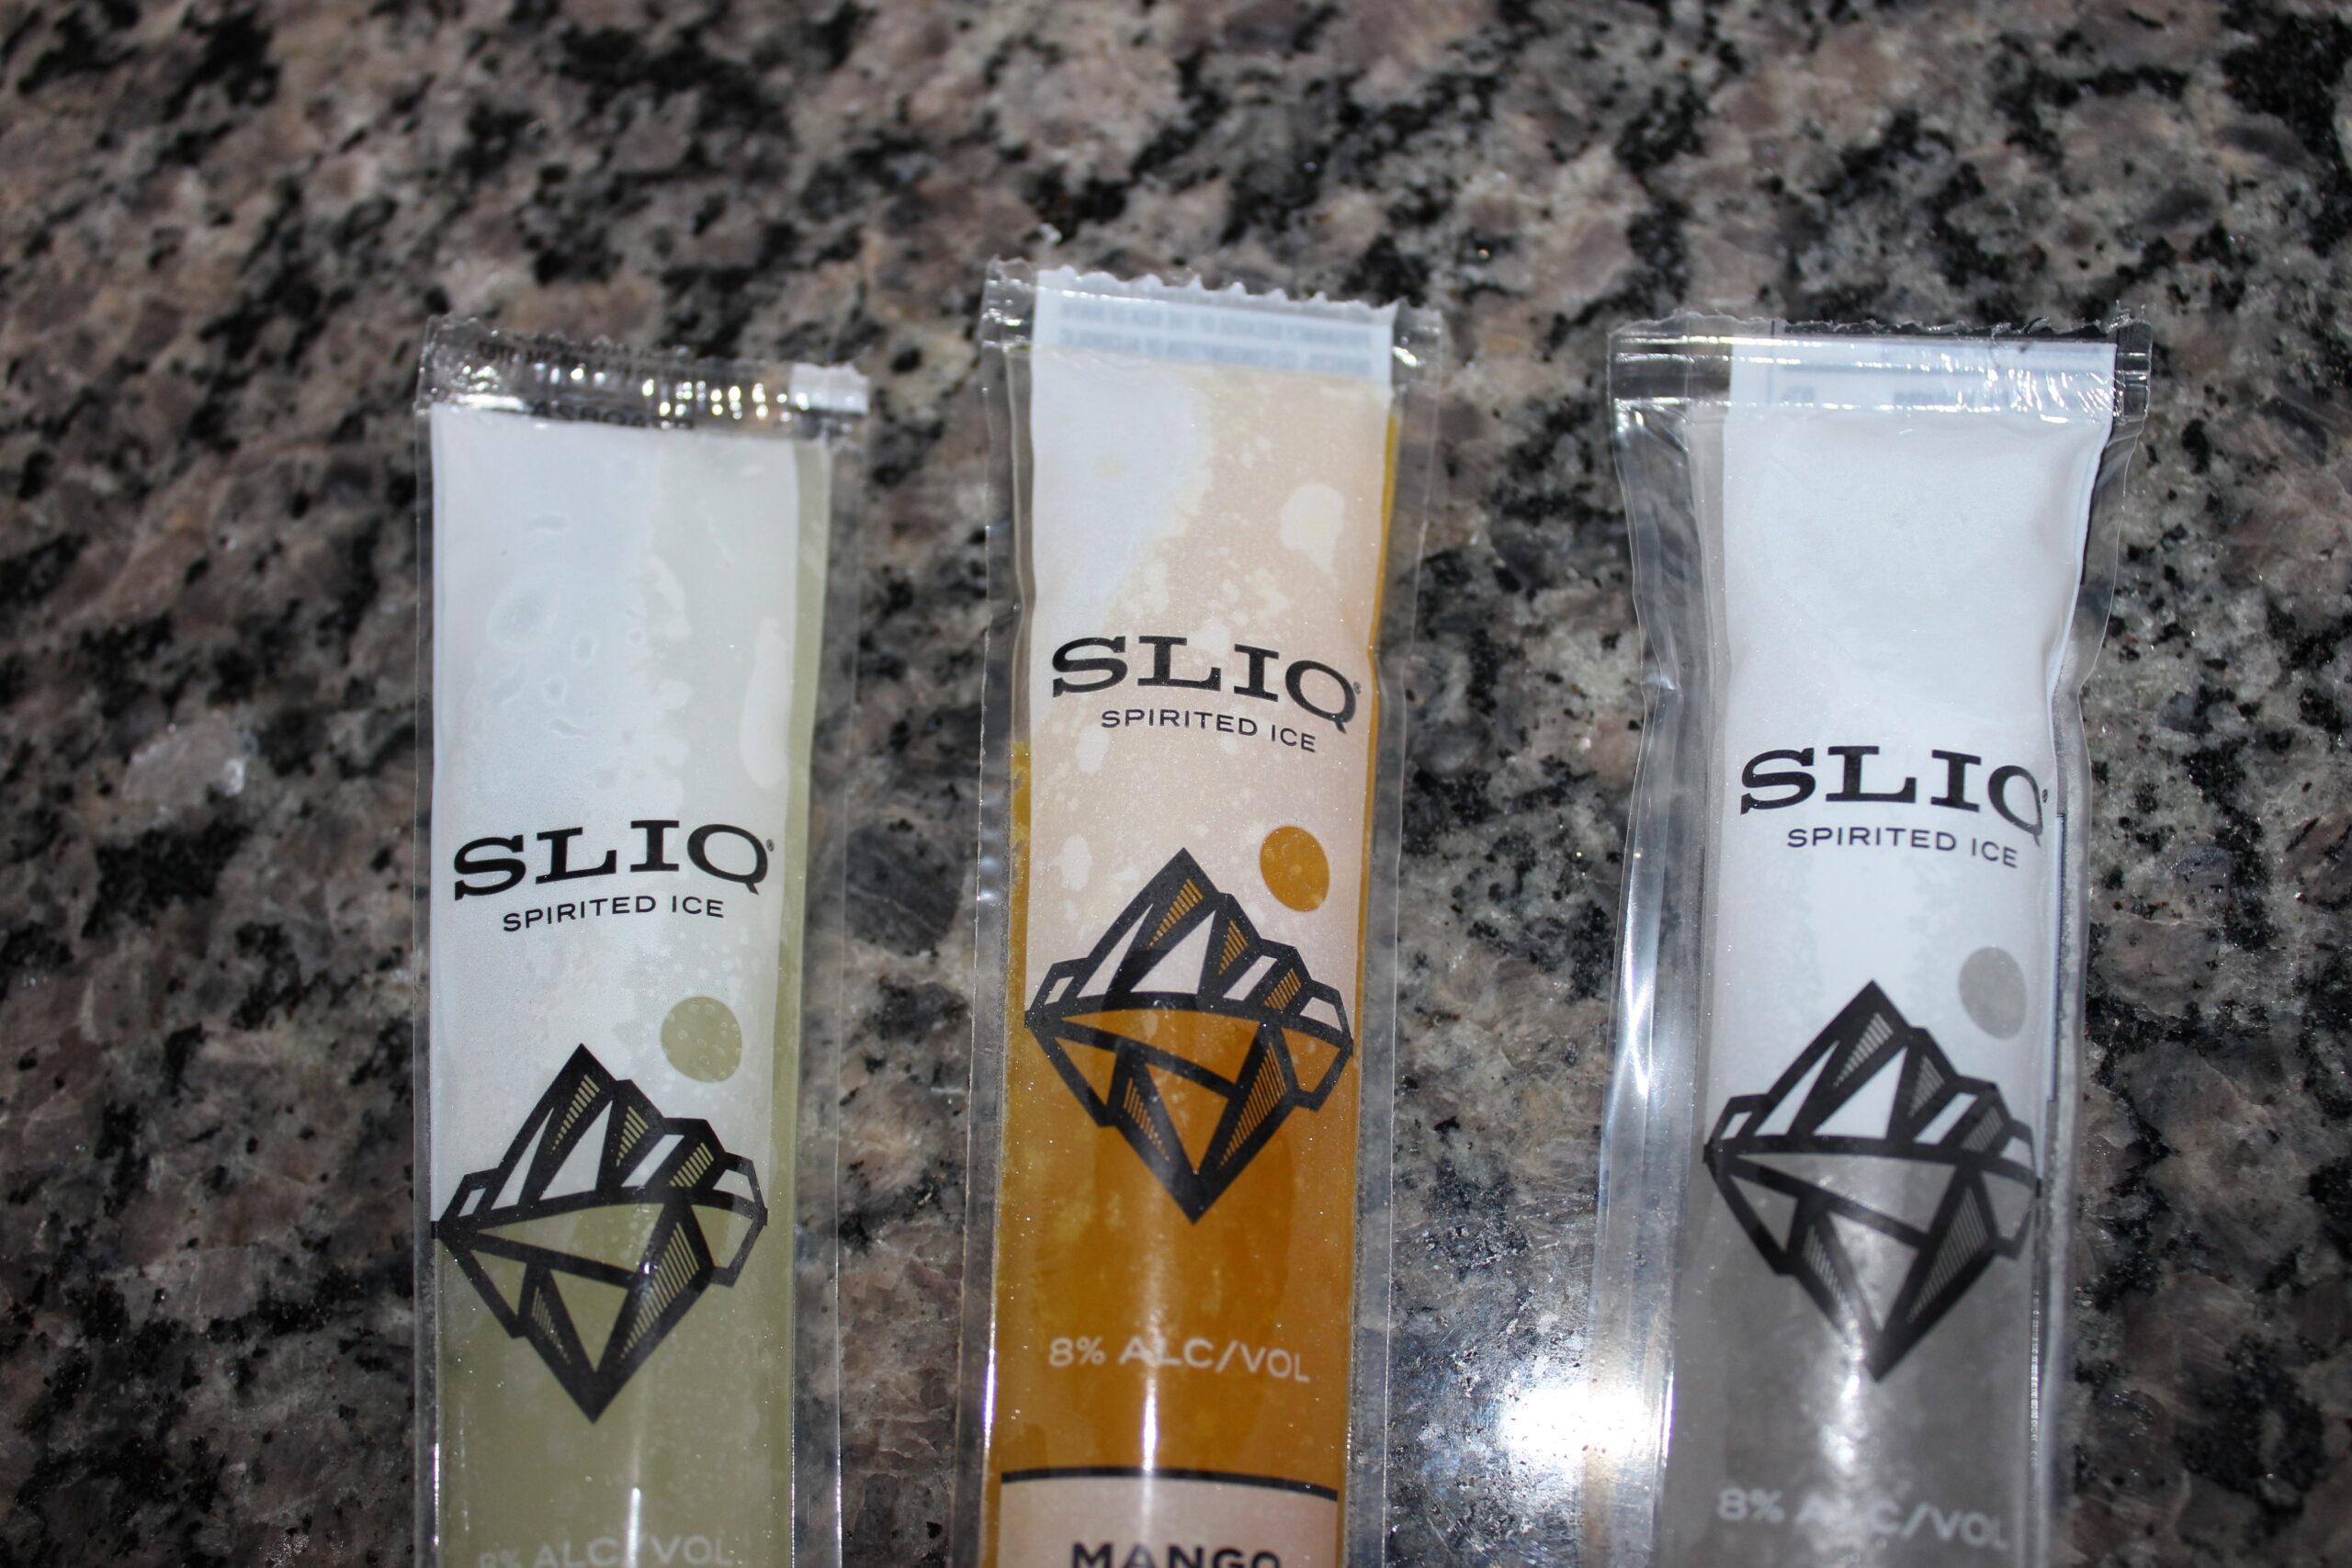 SLIQ Spirited Ice Expands Distribution into New York Just In Time For Summer